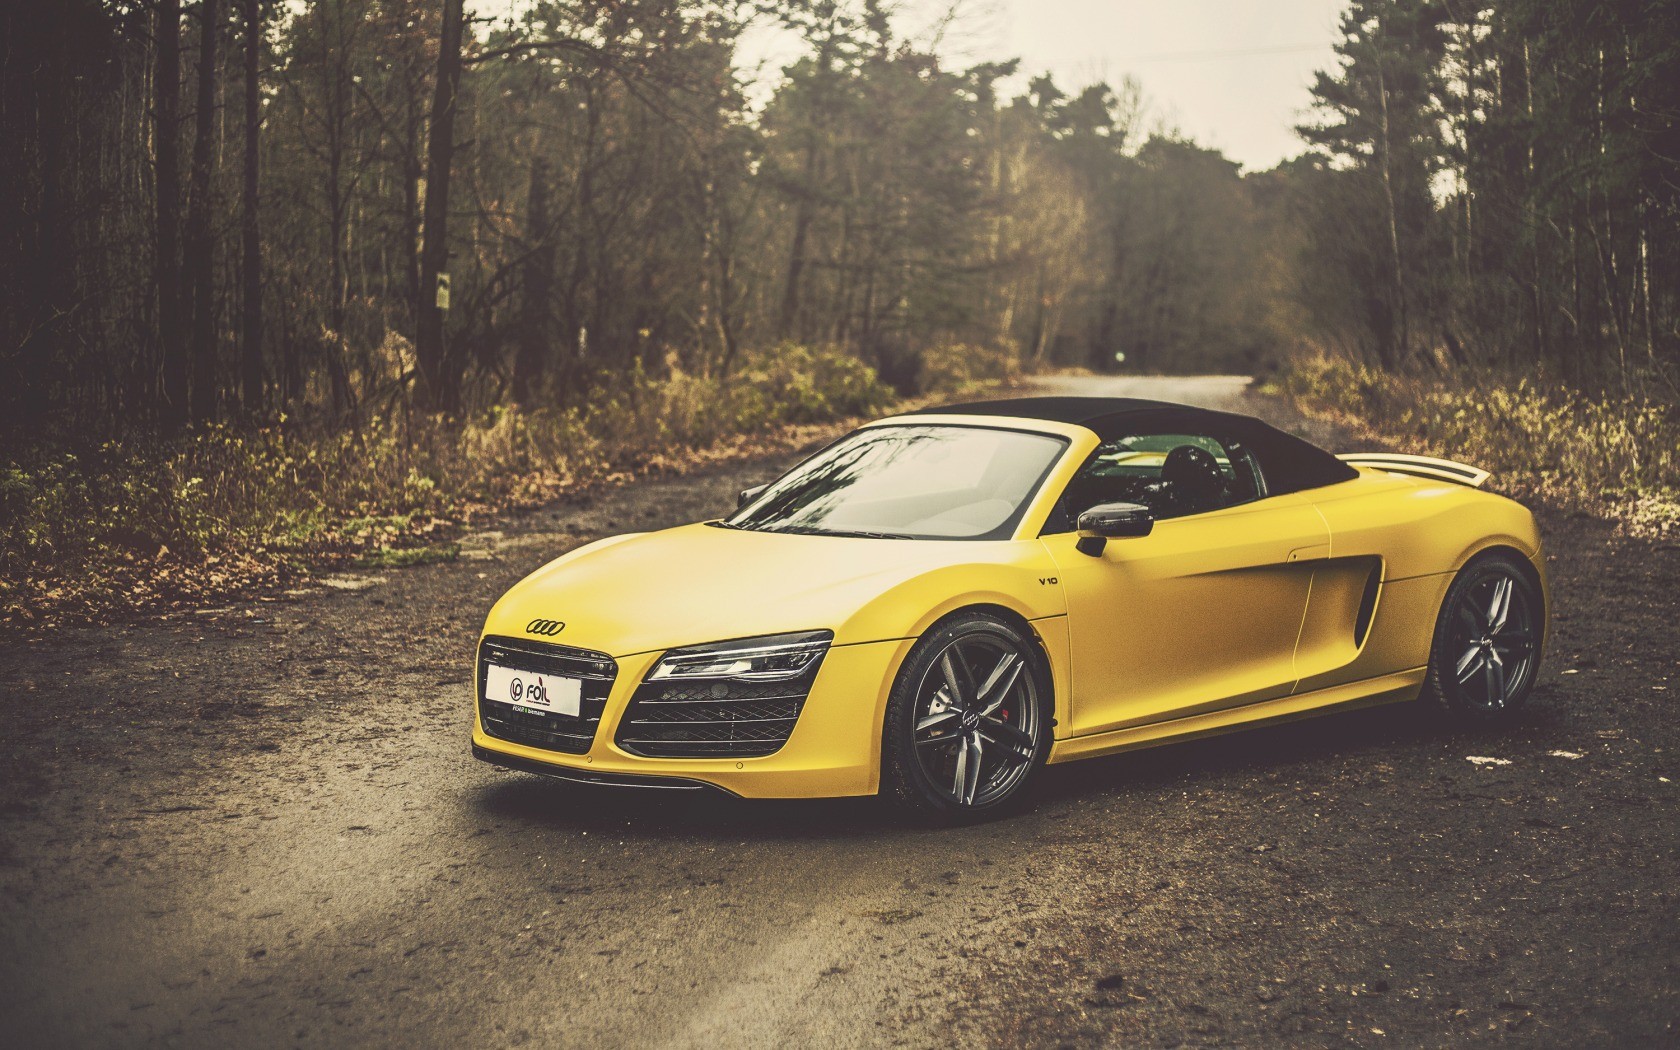 Car Audi Yellow Audi R8 Spyder Wallpapers Hd Desktop And Mobile Backgrounds